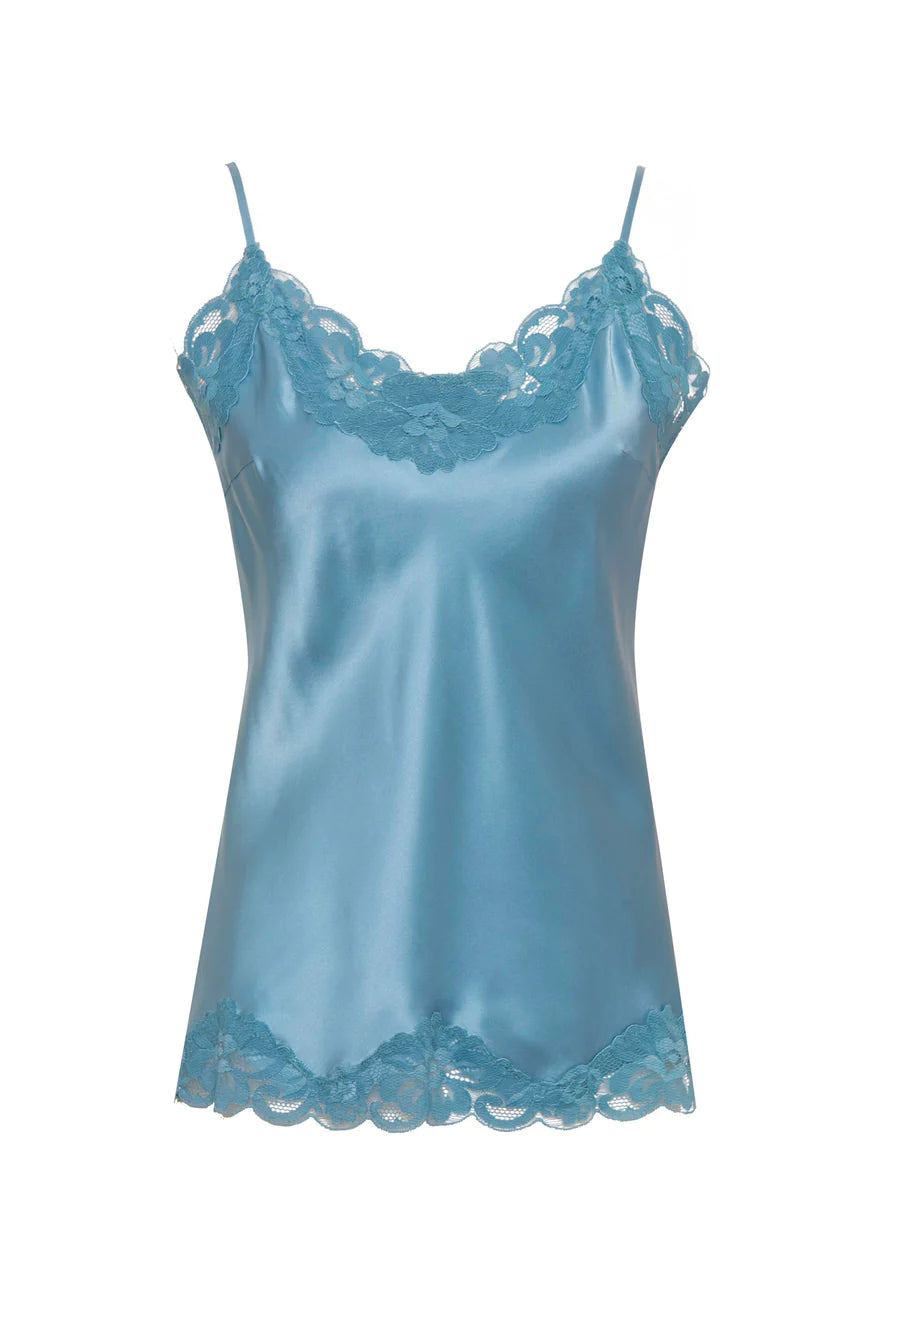 Floral Lace Cami in Baltic Blue